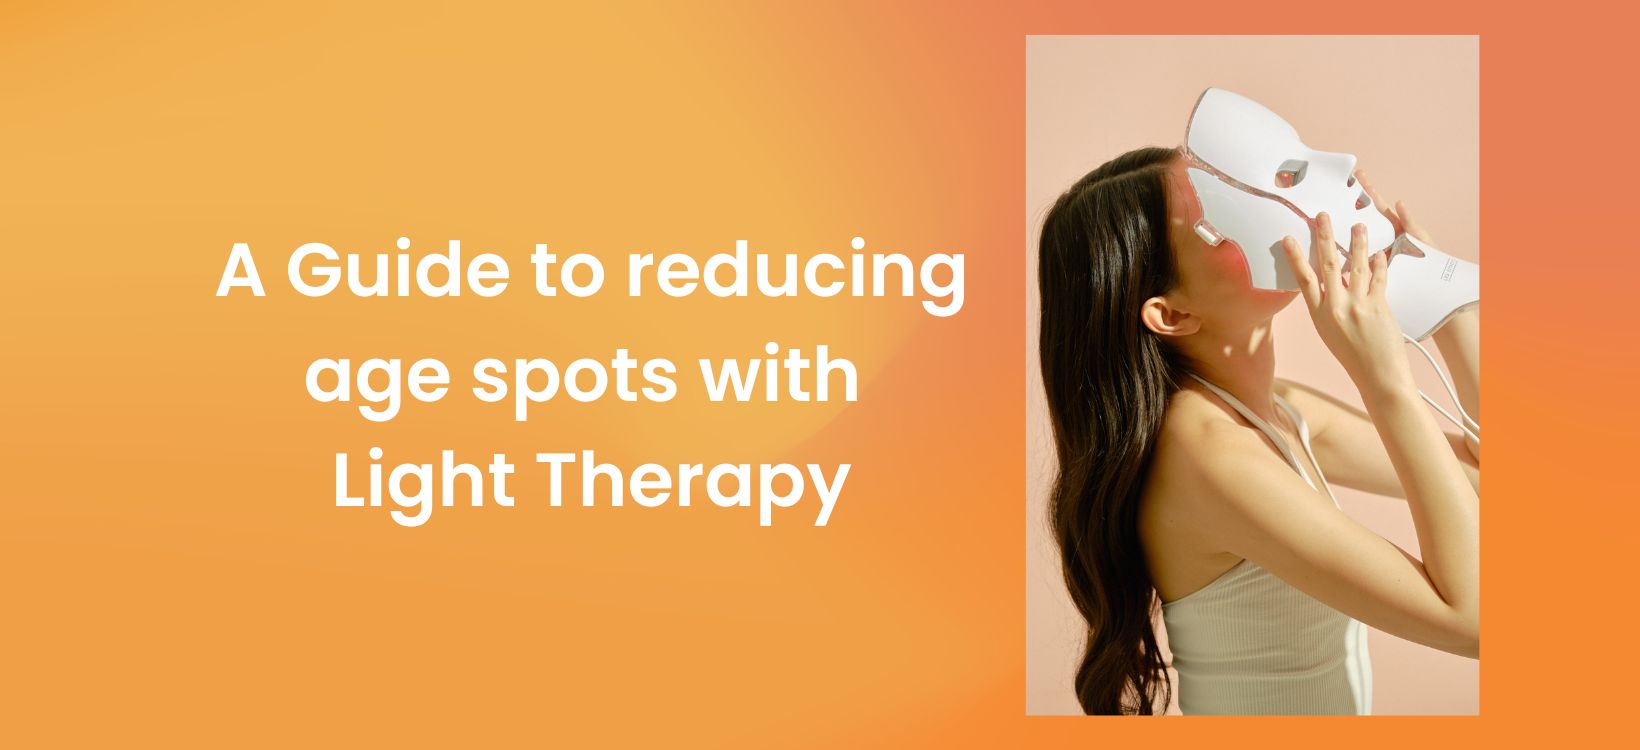 A Guide to Reducing Age Spots with Light Therapy